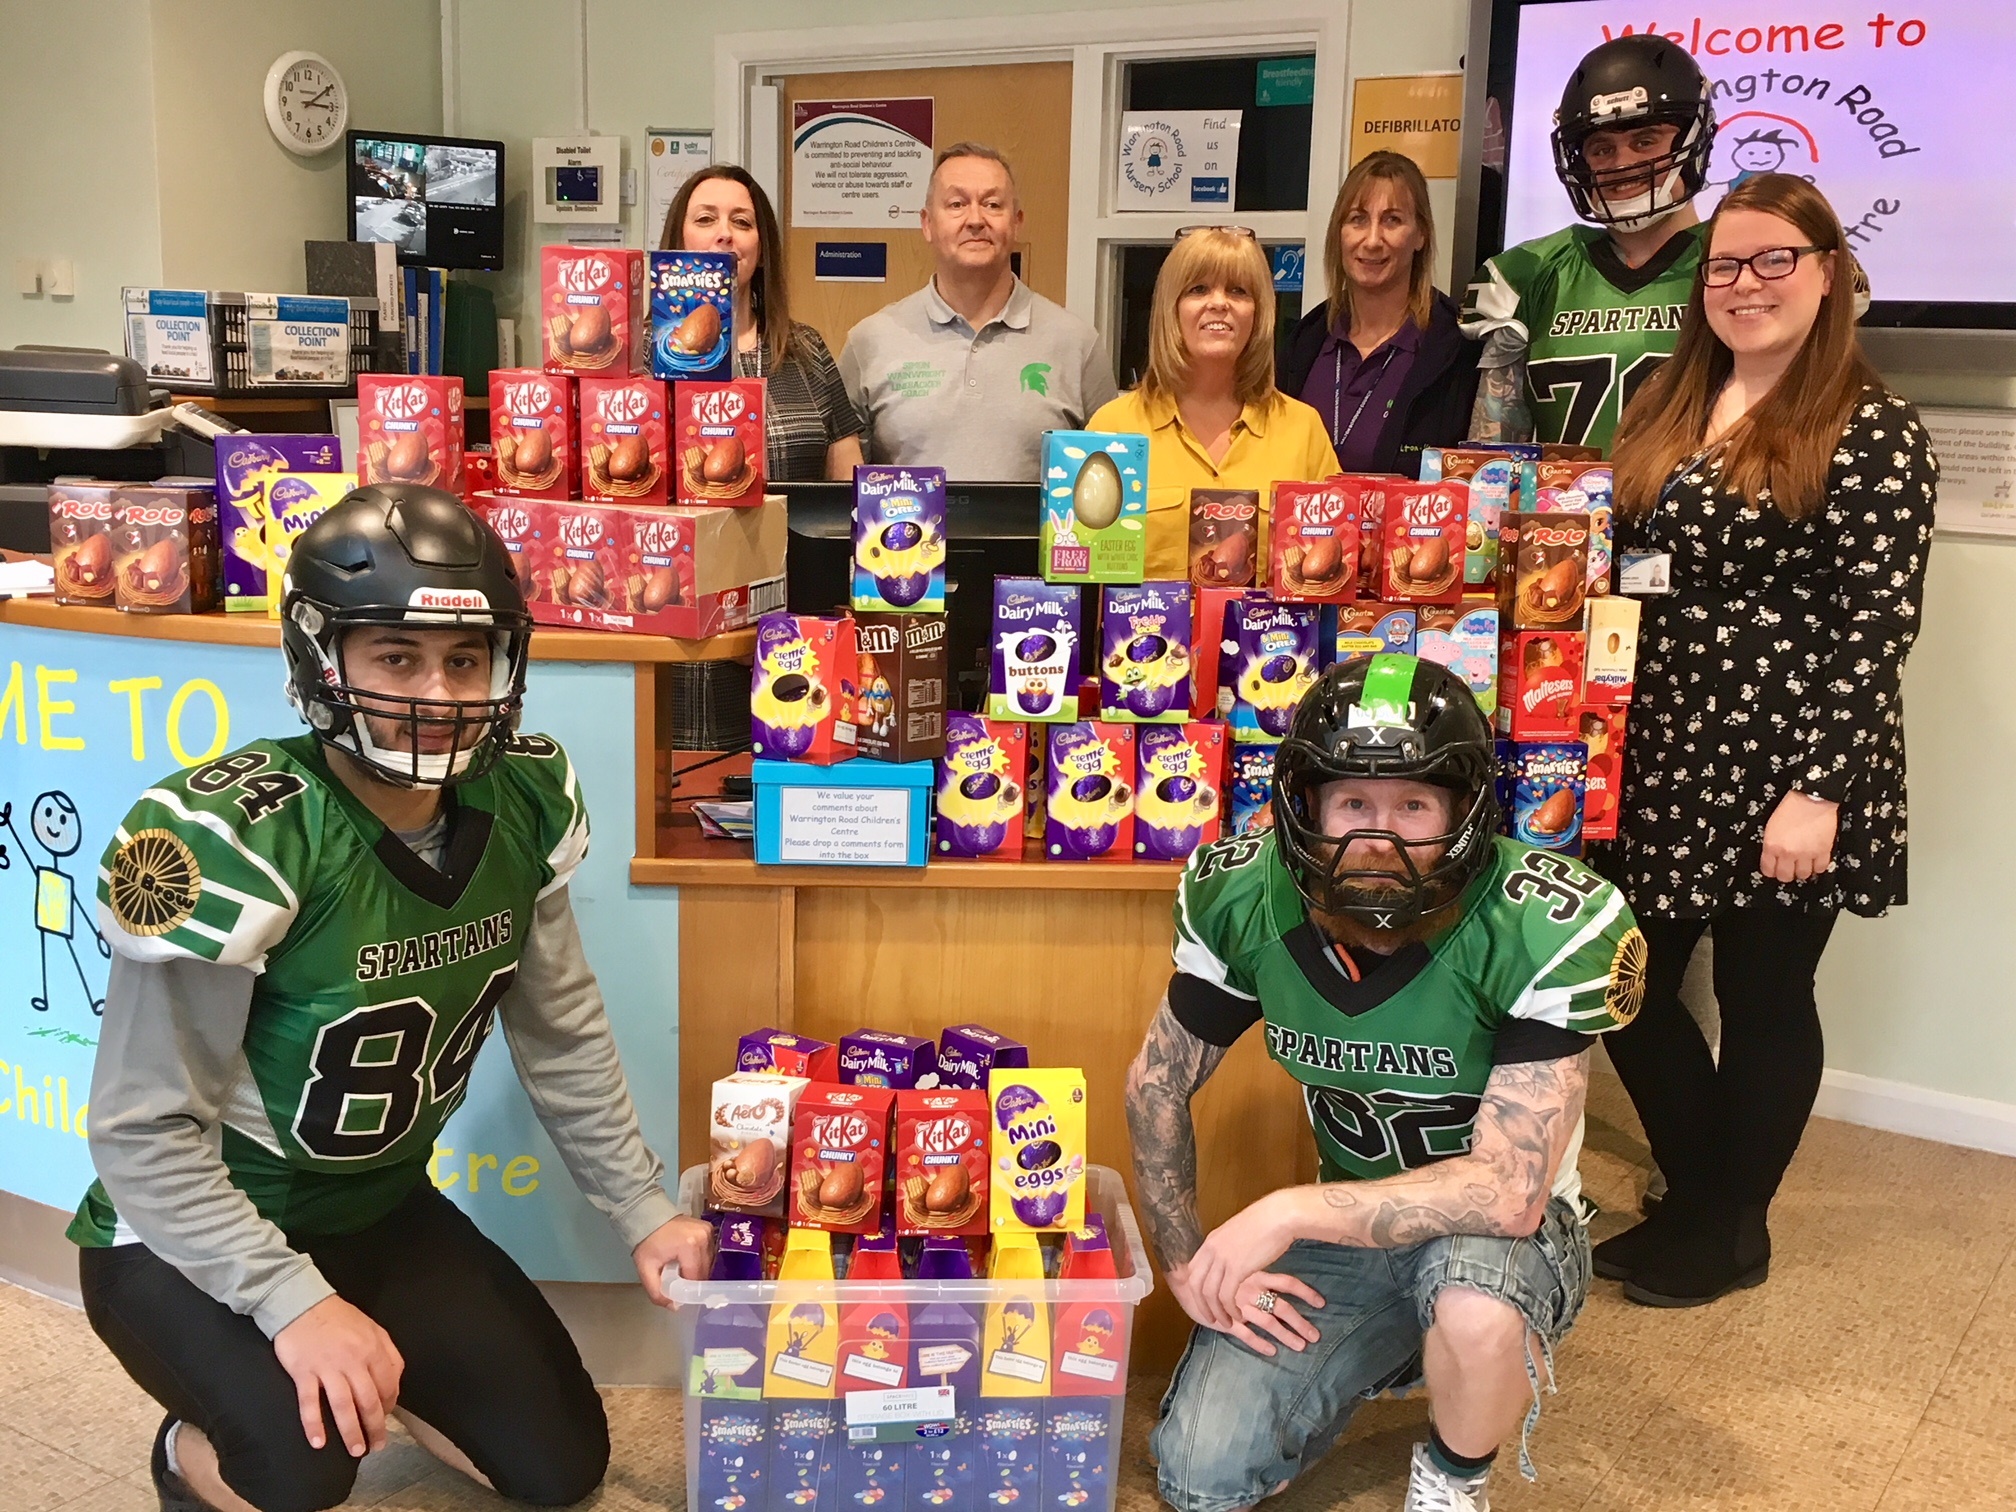 American footballers show their softer side, with an egg-straordinary effort for local children